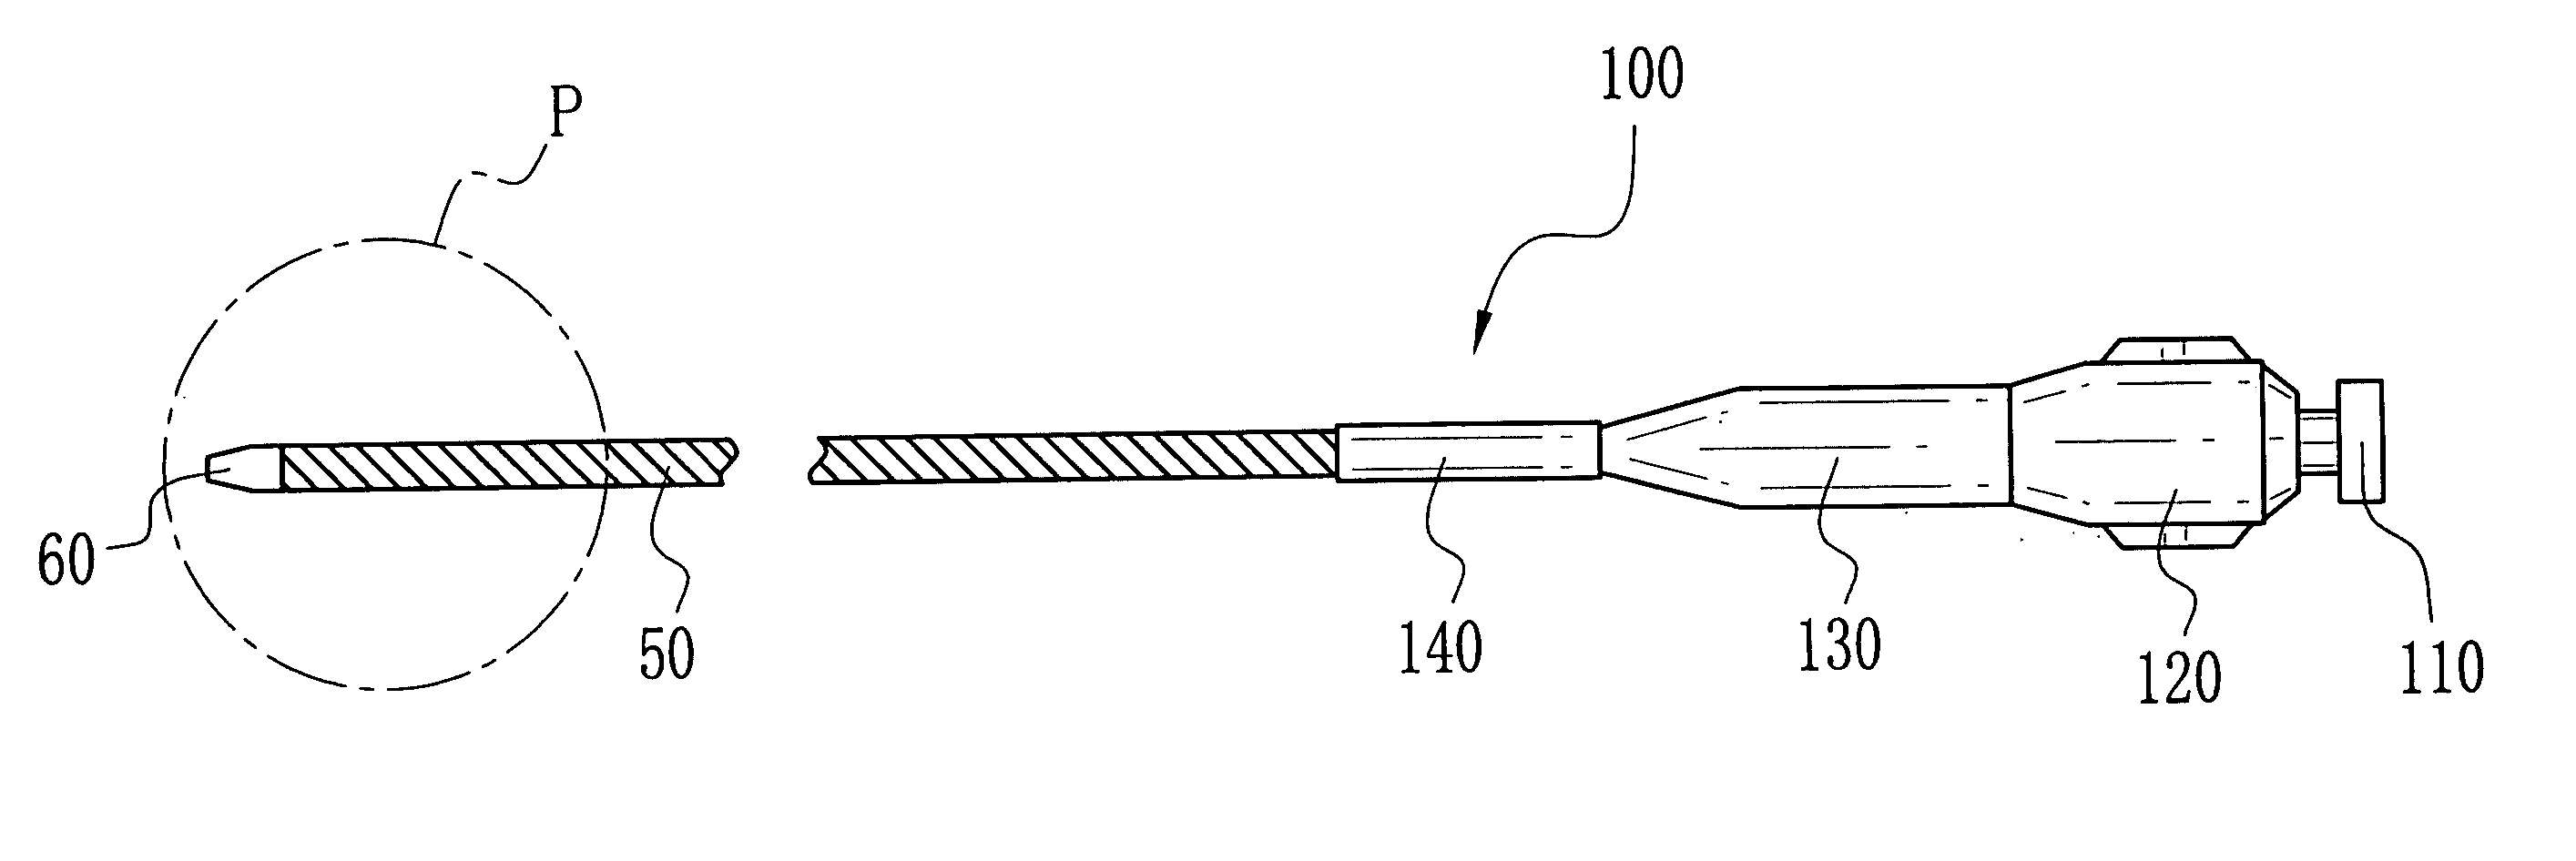 Medical instrument and medical equipment for treatment, and rotational handle device